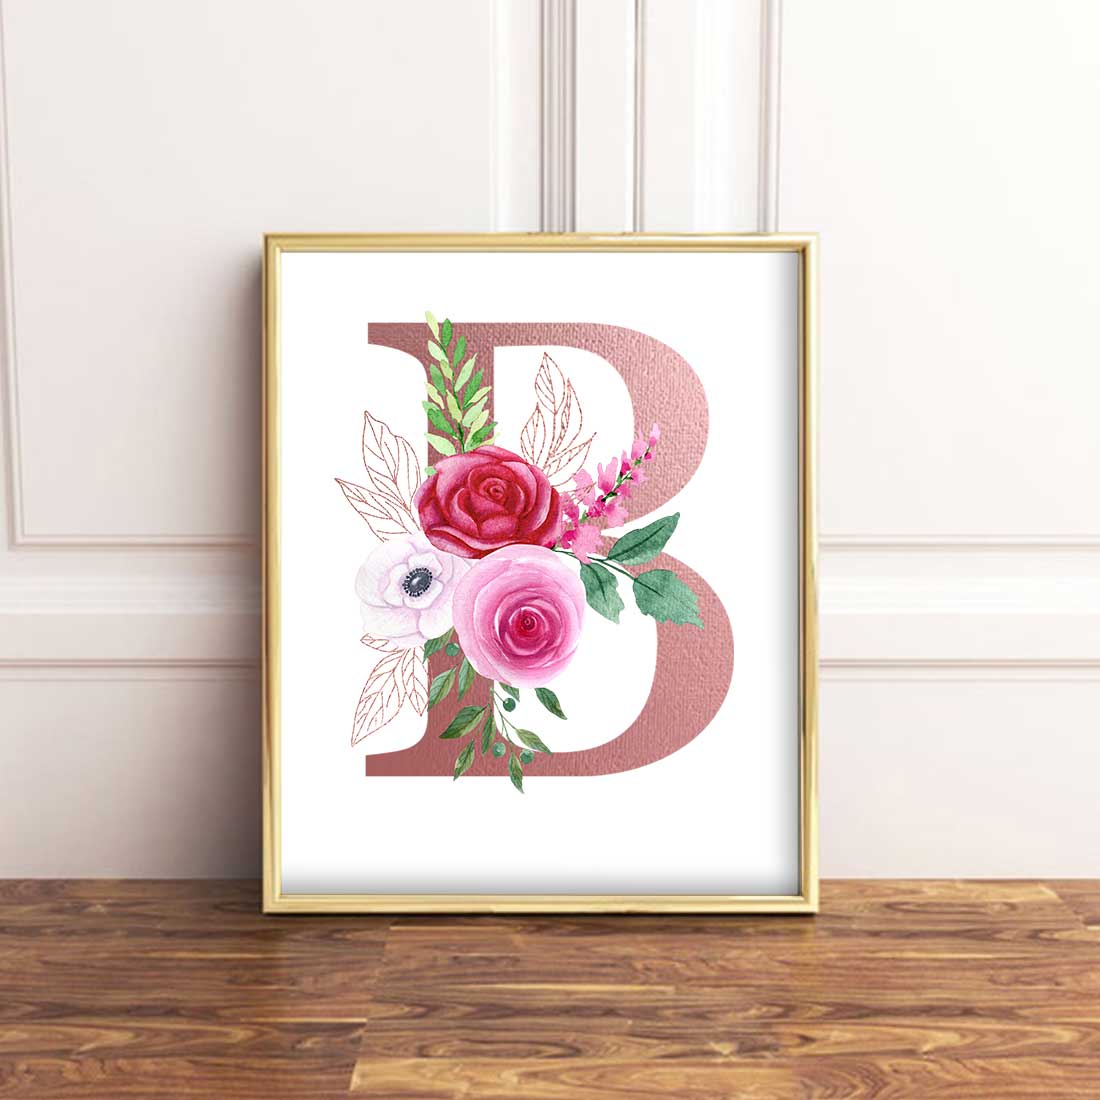 Set of Numbers and Letters with Watercolor Flowers, unique design.